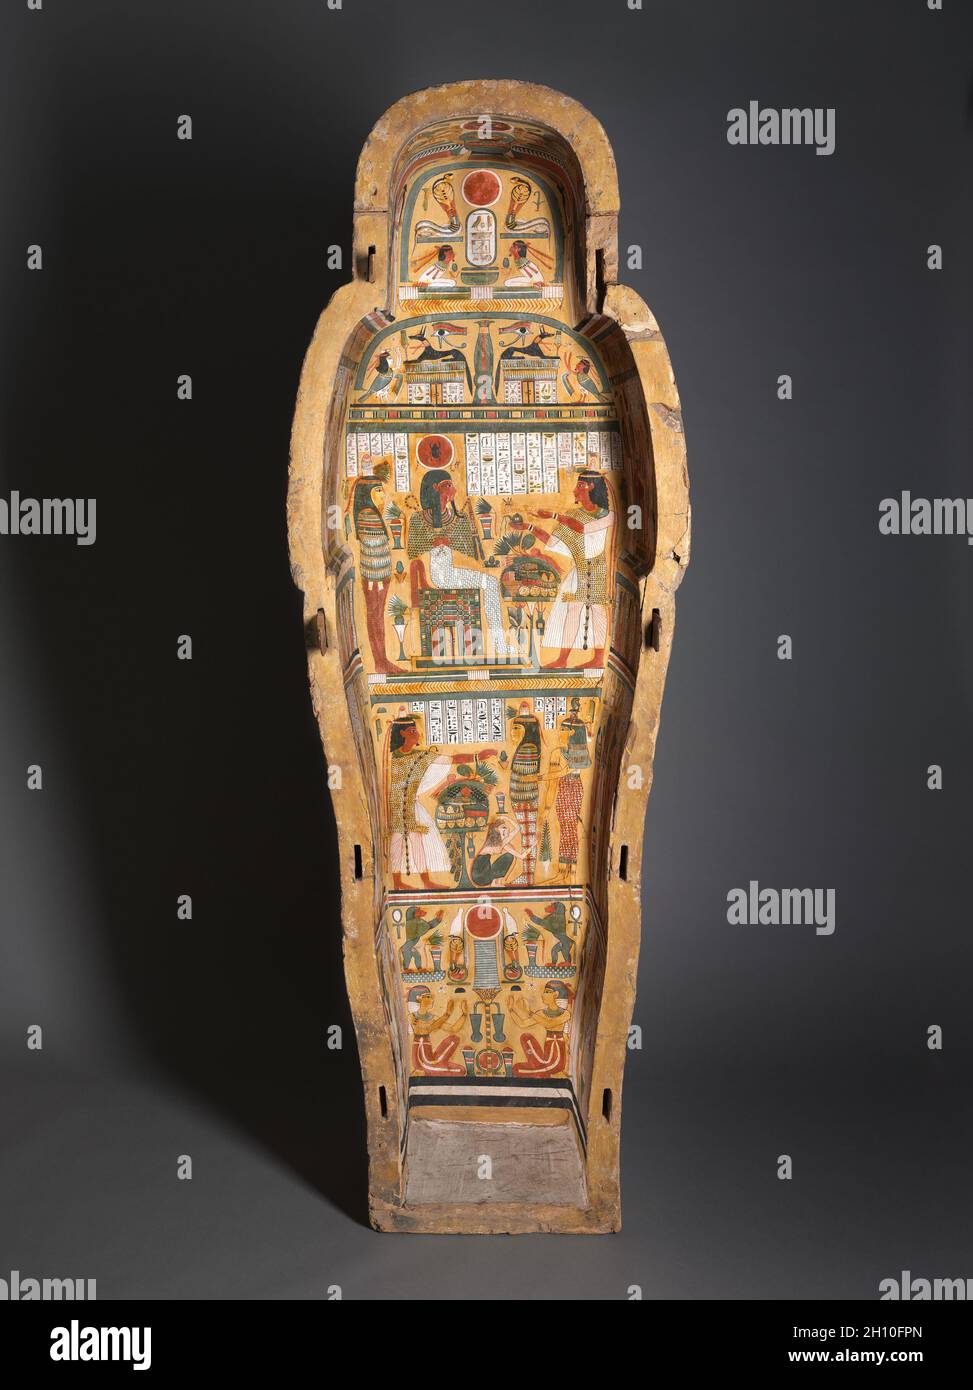 Coffin of Nesykhonsu, c. 976–889 BC. Egypt, Thebes, Third Intermediate Period, late Dynasty 21 (1069-945 BC) to early Dynasty 22 (945-715 BC). Gessoed and painted sycamore fig ; overall: 70 cm (27 9/16 in.). Stock Photo